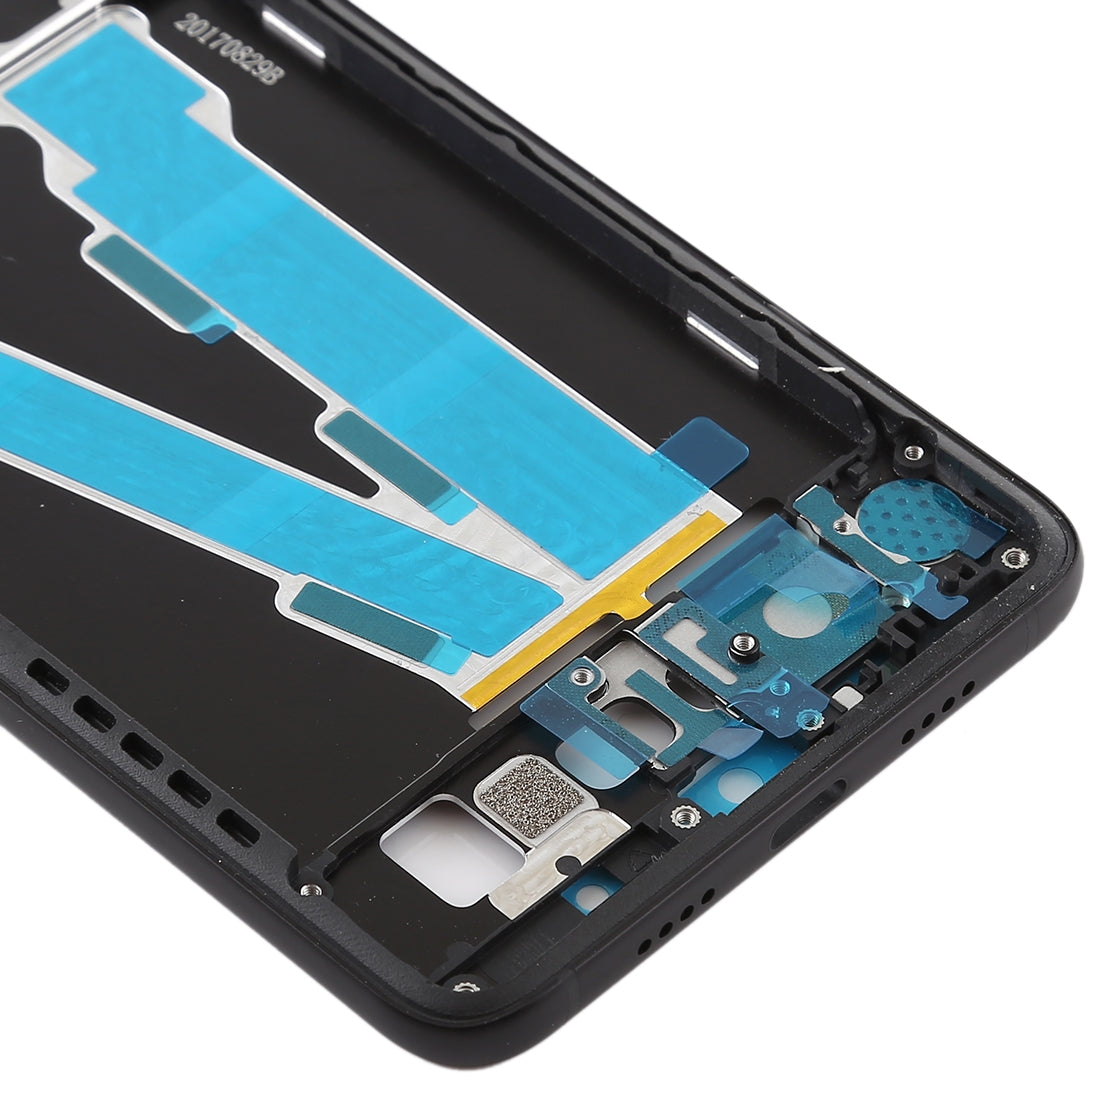 Xiaomi Note 3 Black LCD Intermediate Frame Chassis